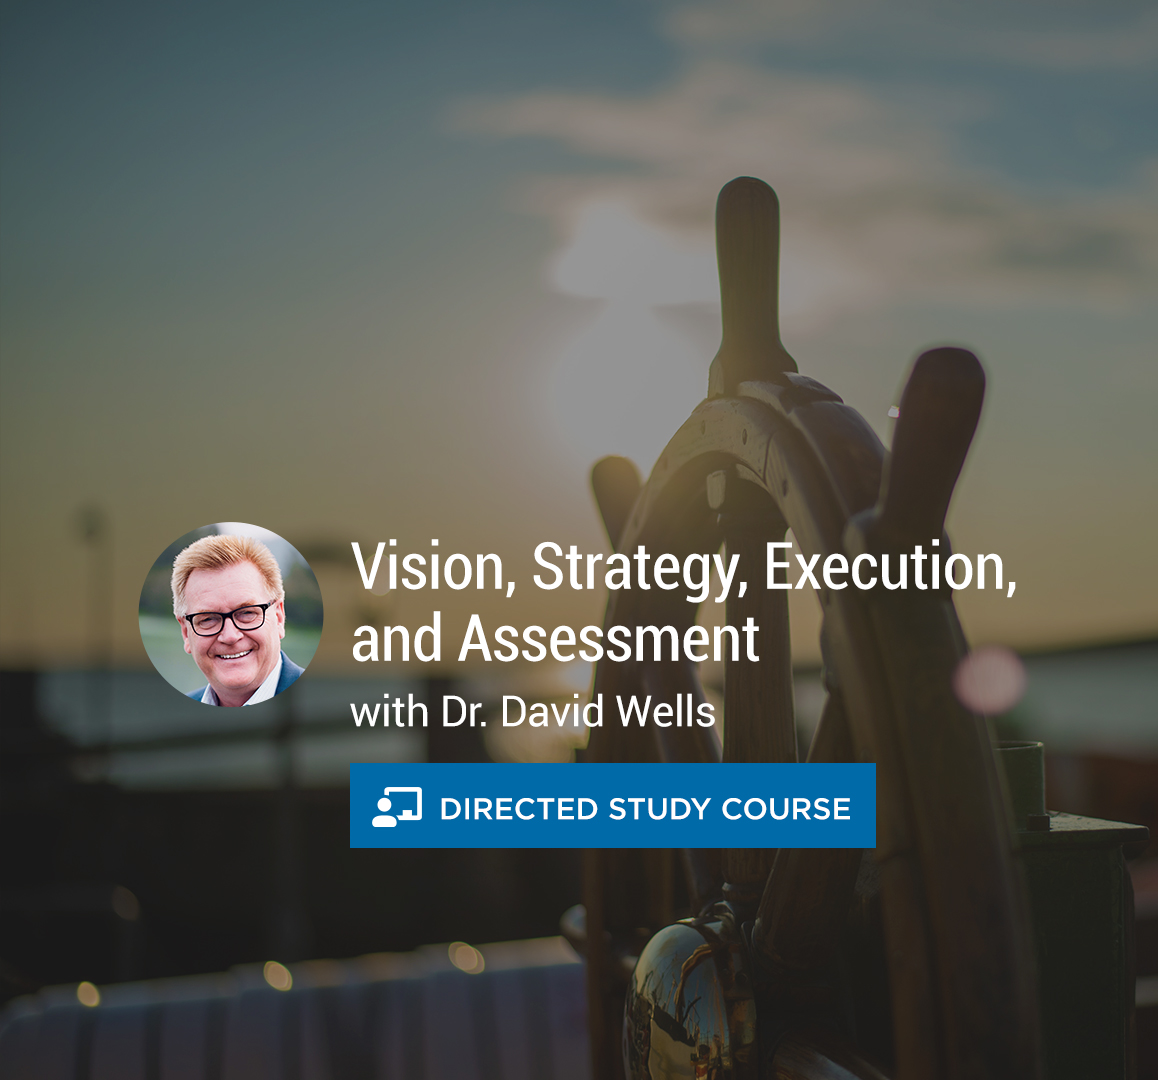 Vision, Strategy, Execution, and Assessment Course